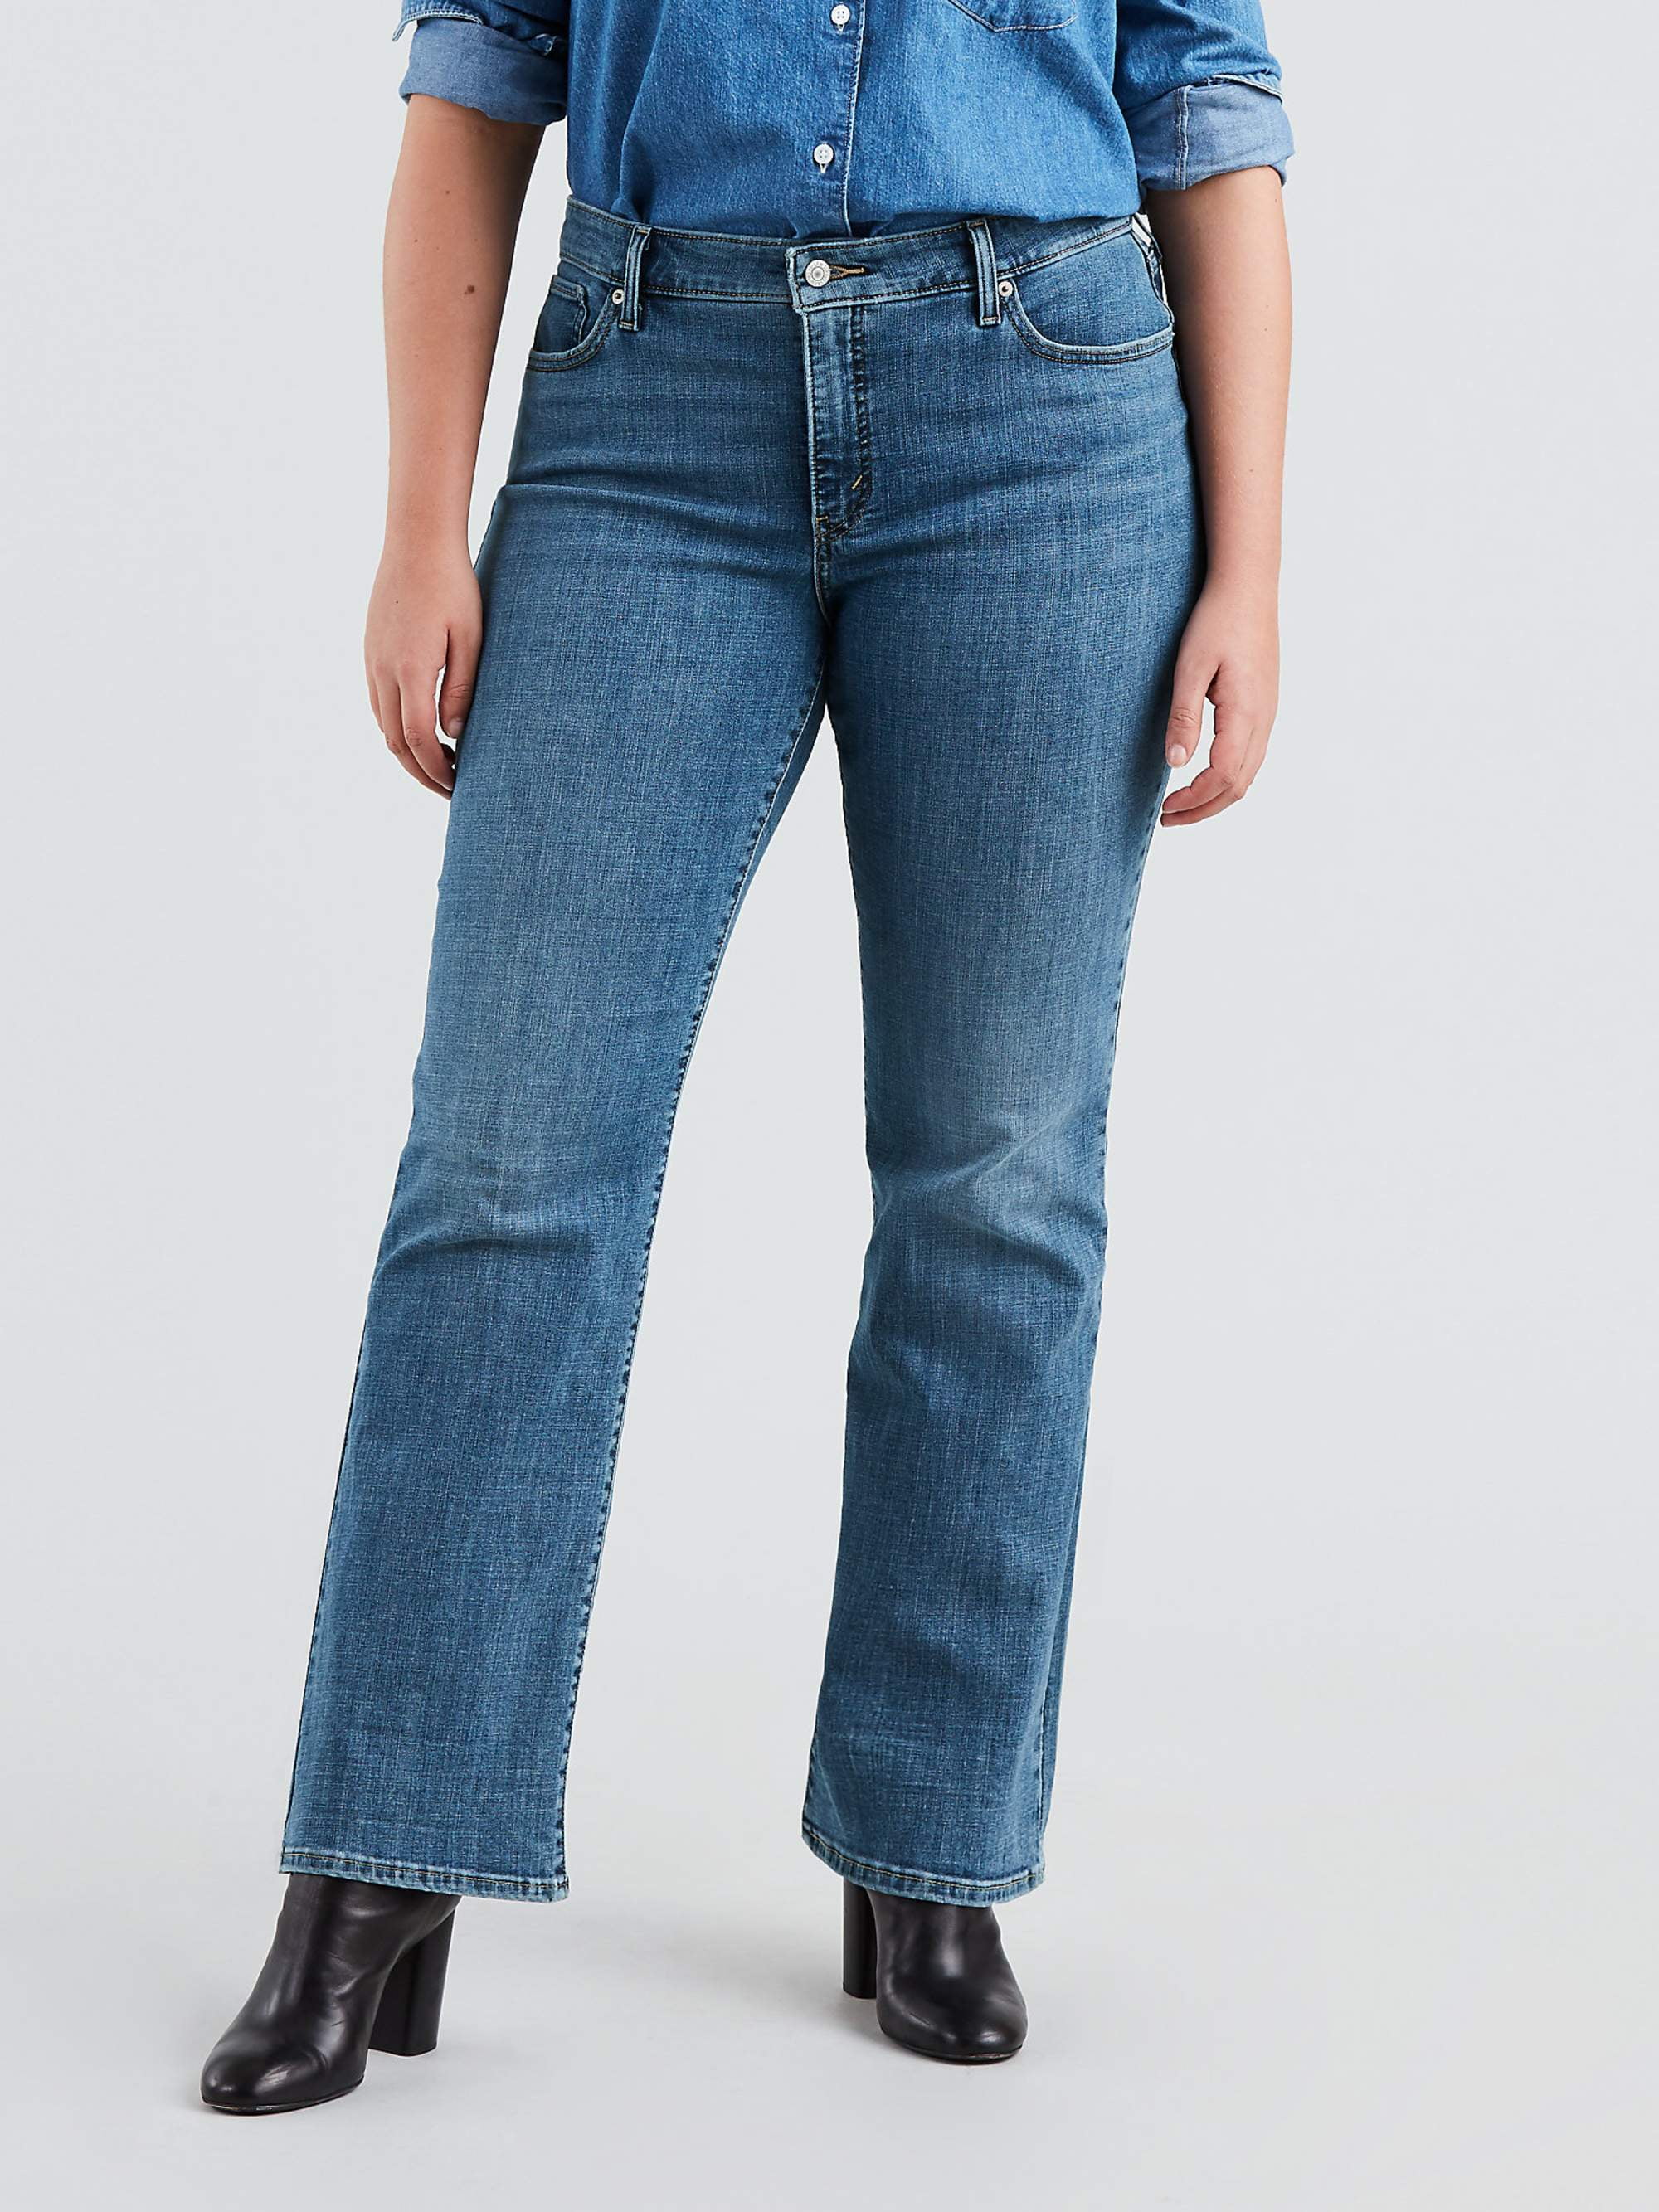 Buy > levi's classic bootcut women's jeans > in stock